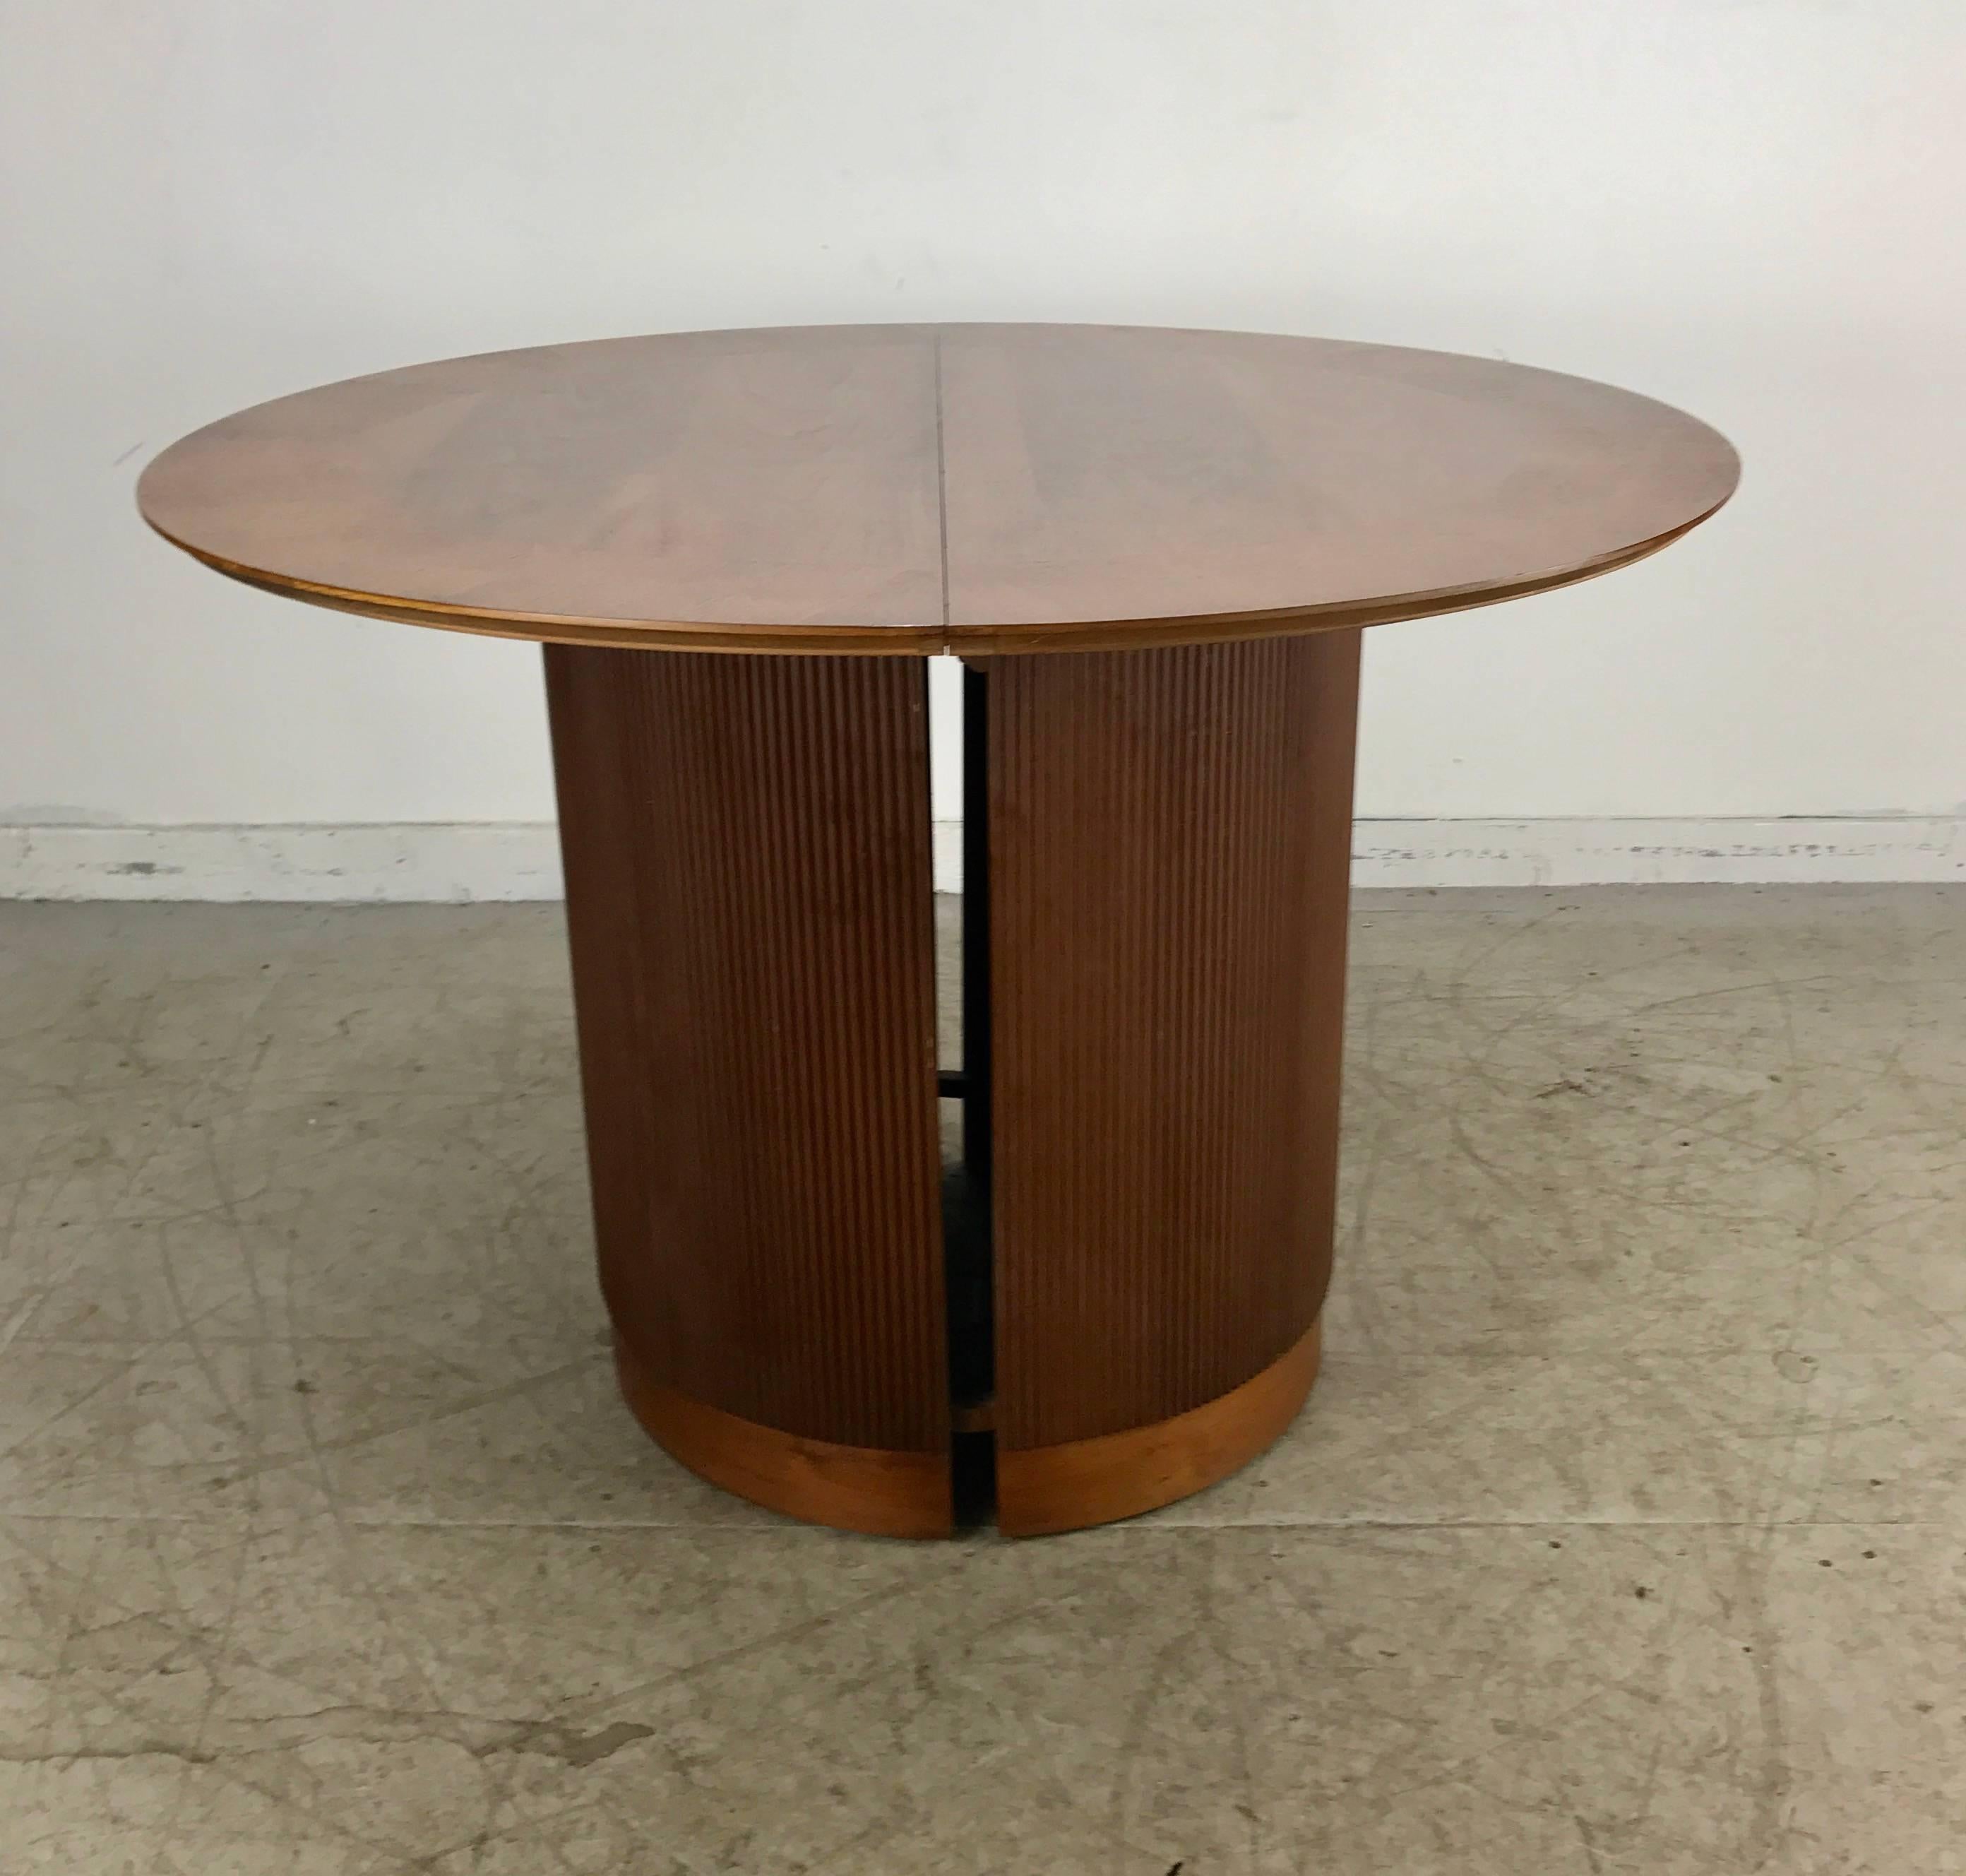 Unusual cylinder base round expandable dining table for Lane Furniture. Classic modern, elegant styling (very Bauhaus). Beautiful oiled walnut figured top, ribbed cylinder base. Table measuring 44